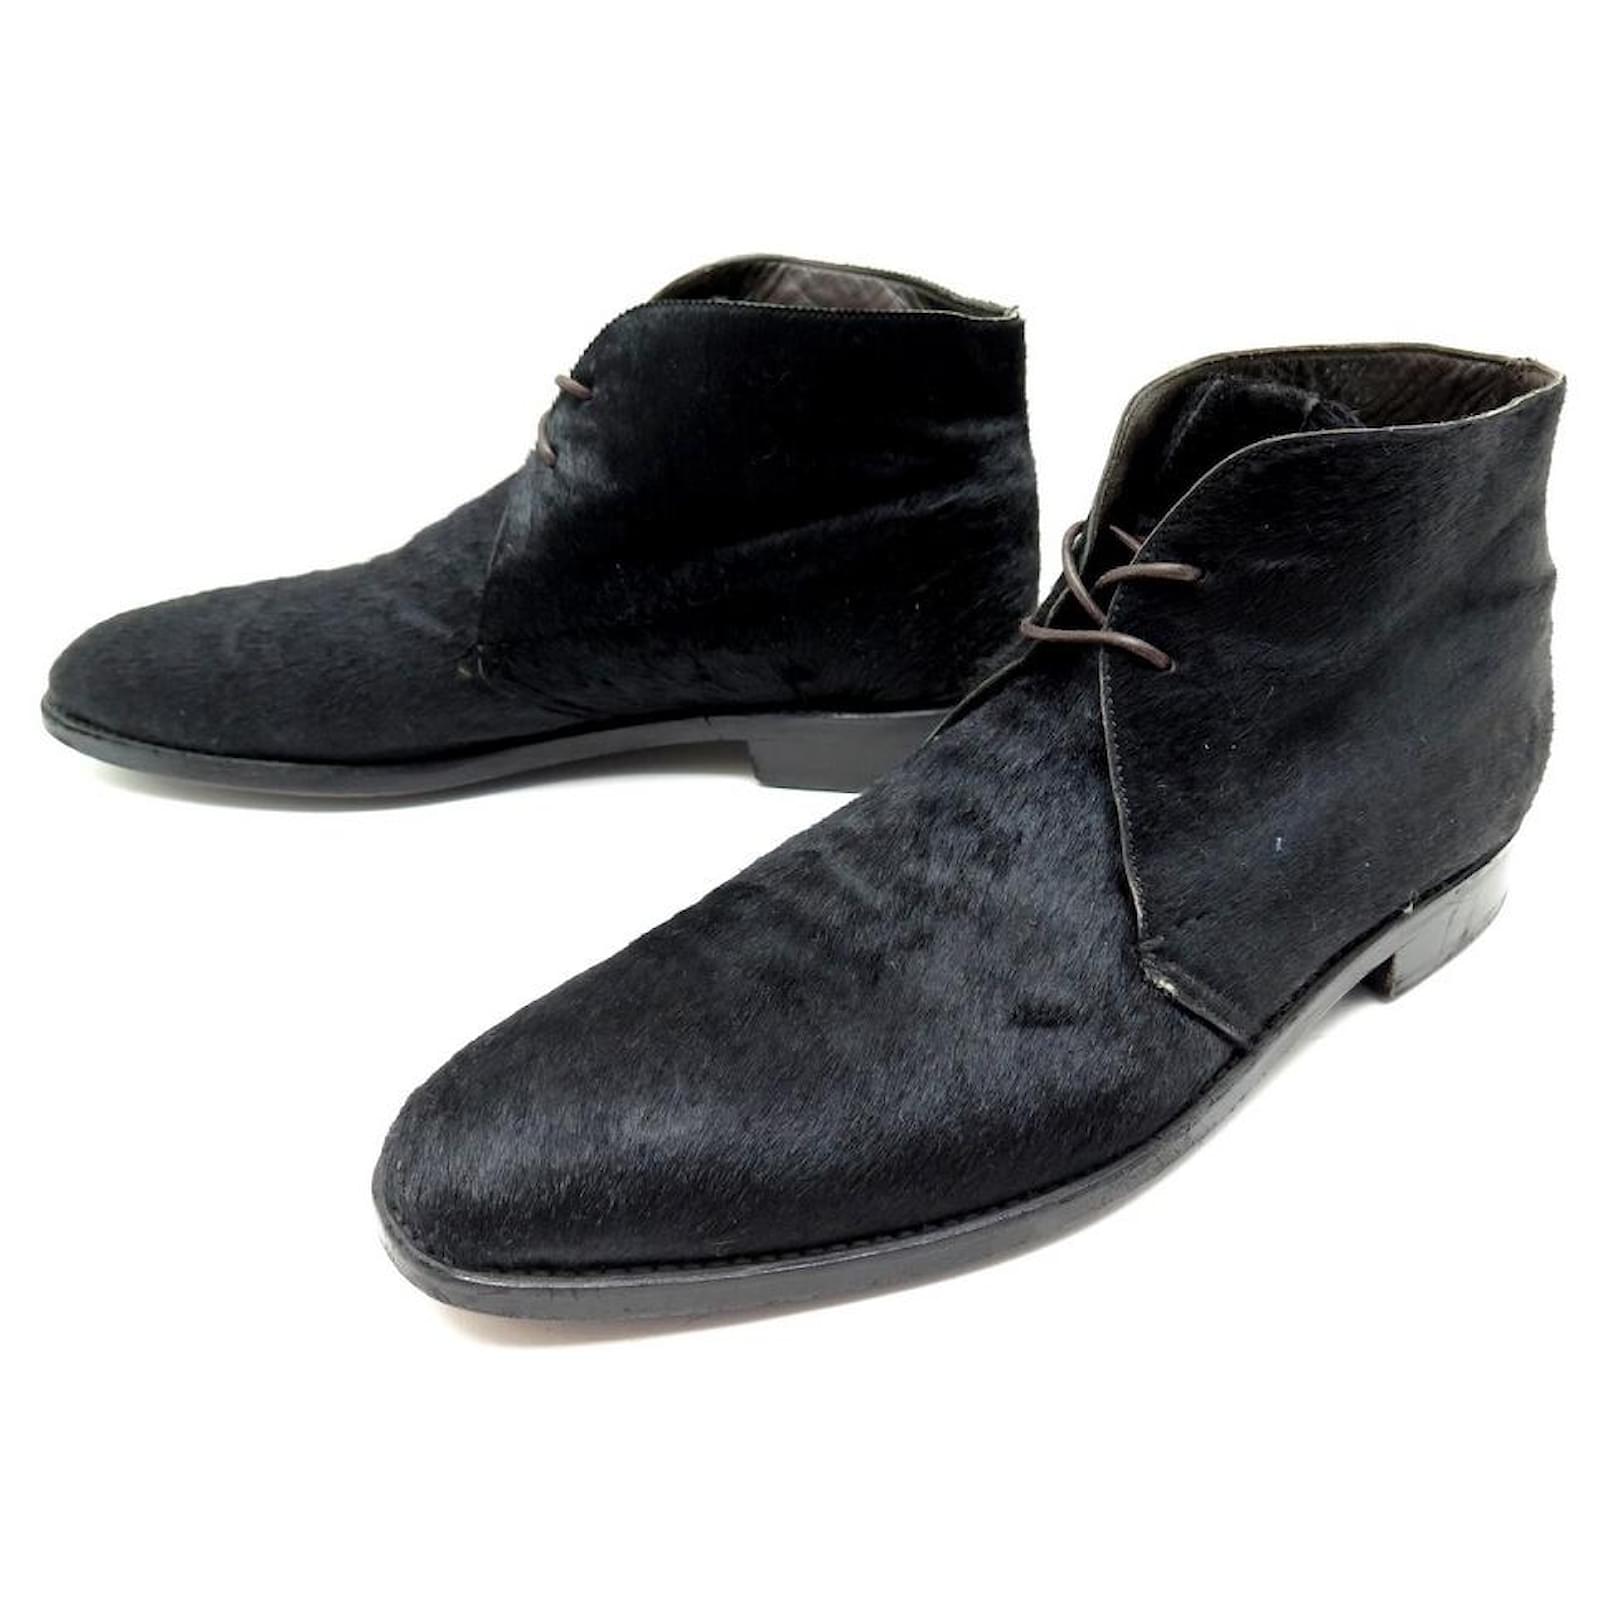 HESCHUNG SHOES CHUKKA BOOTS 8.5 42.5 BLACK LEATHER BOOTS SHOES Pony ...